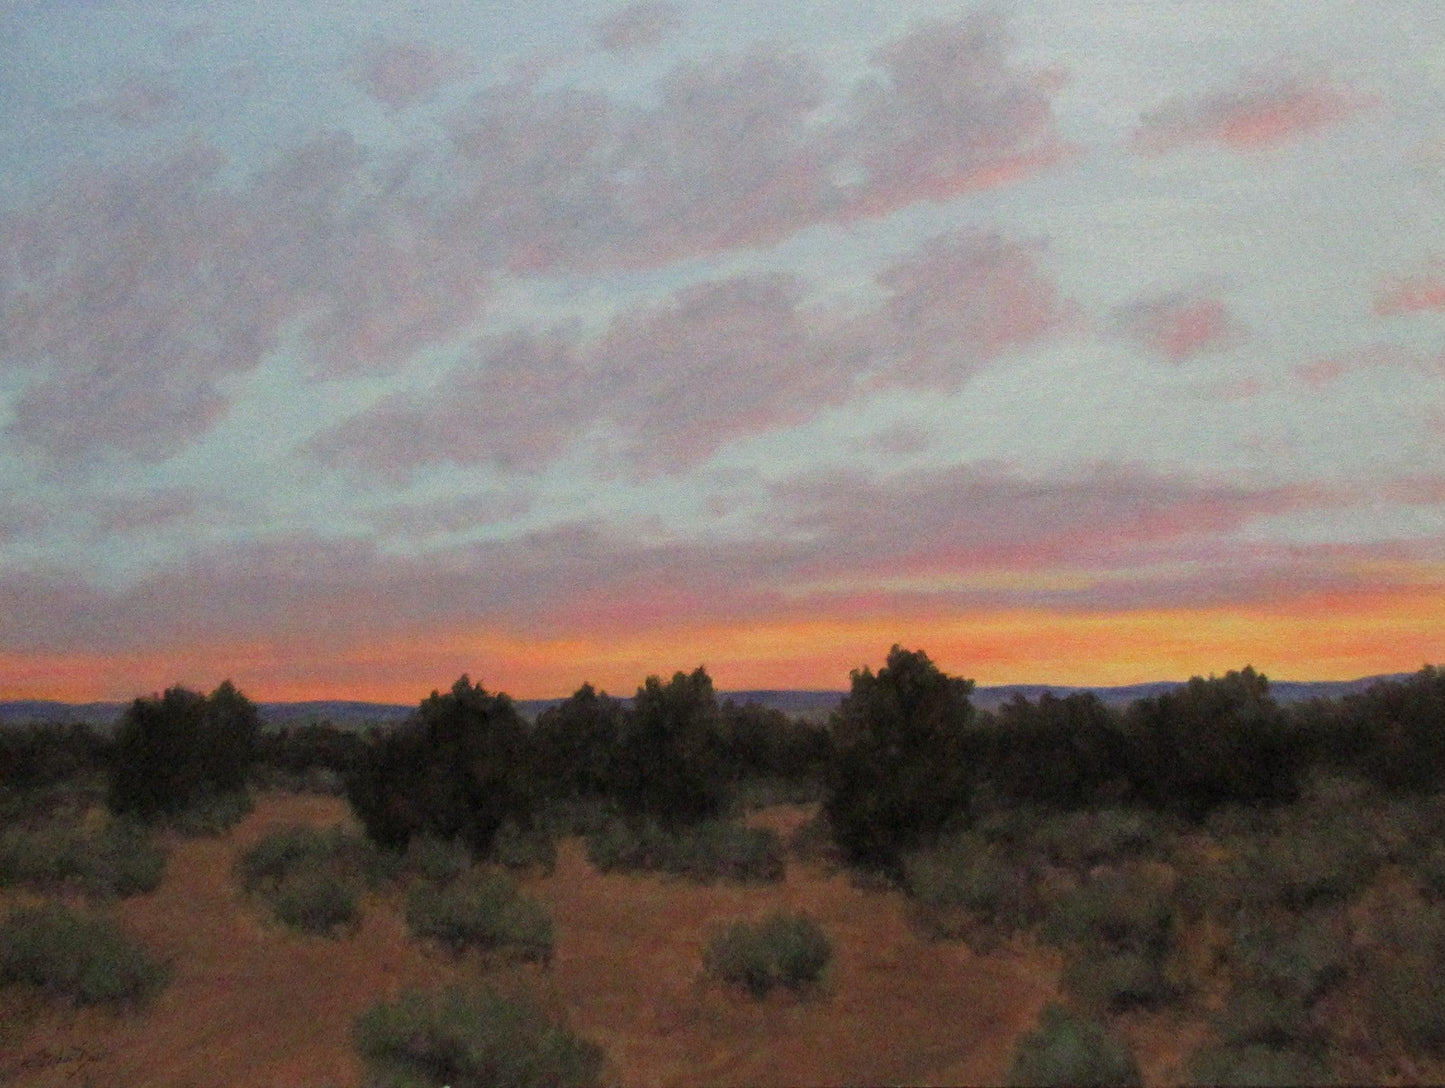 Early Evening Sky-Painting-Stephen Day-Sorrel Sky Gallery